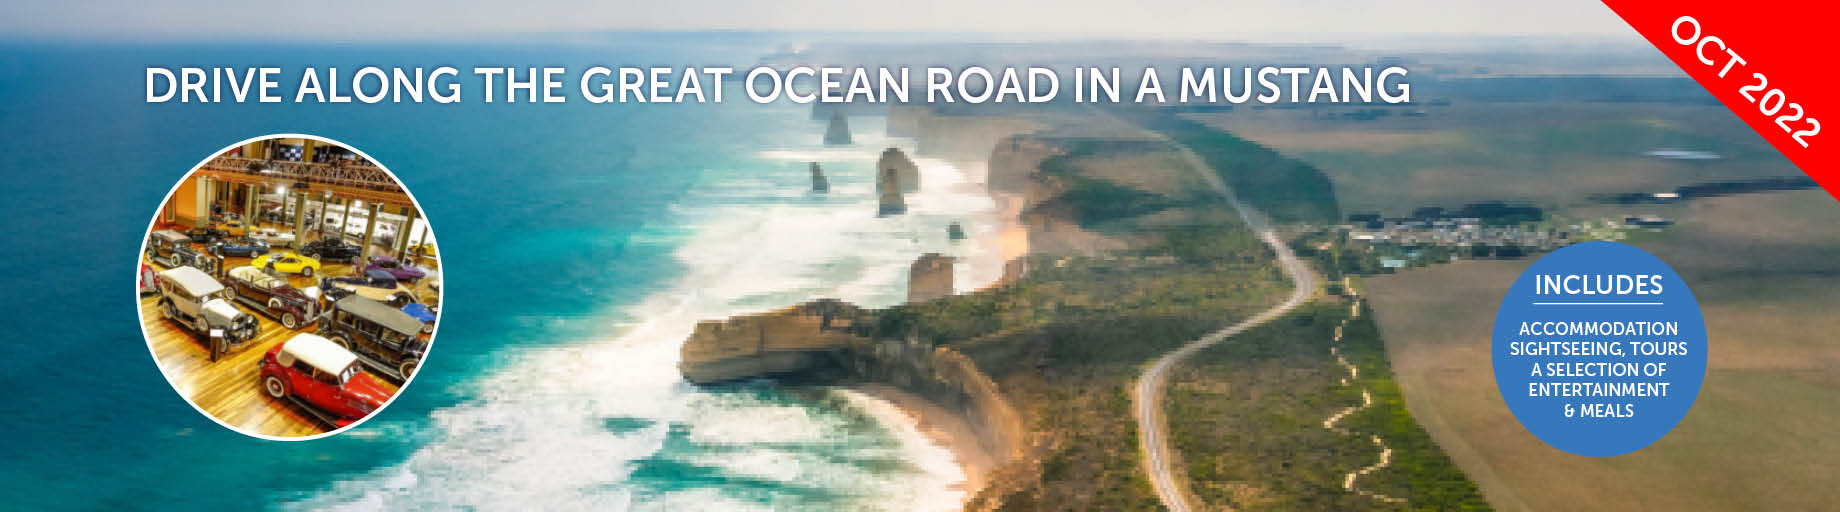 Melbourne Motorclassica and the Great Ocean Road